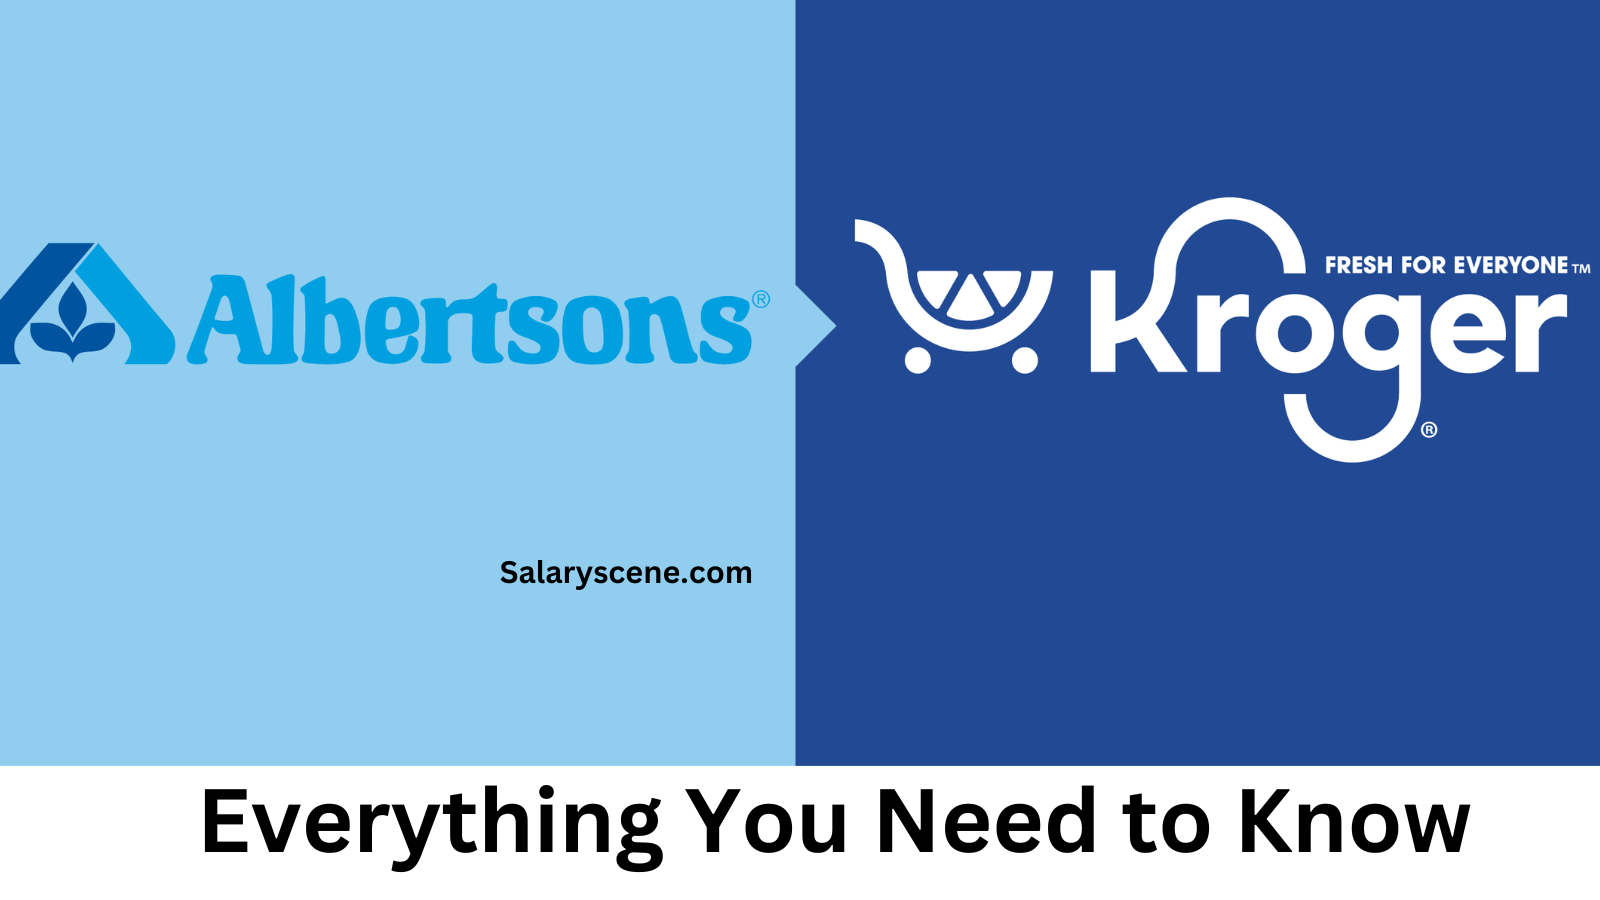 Kroger-Albertsons Merger Everything You Need to Know